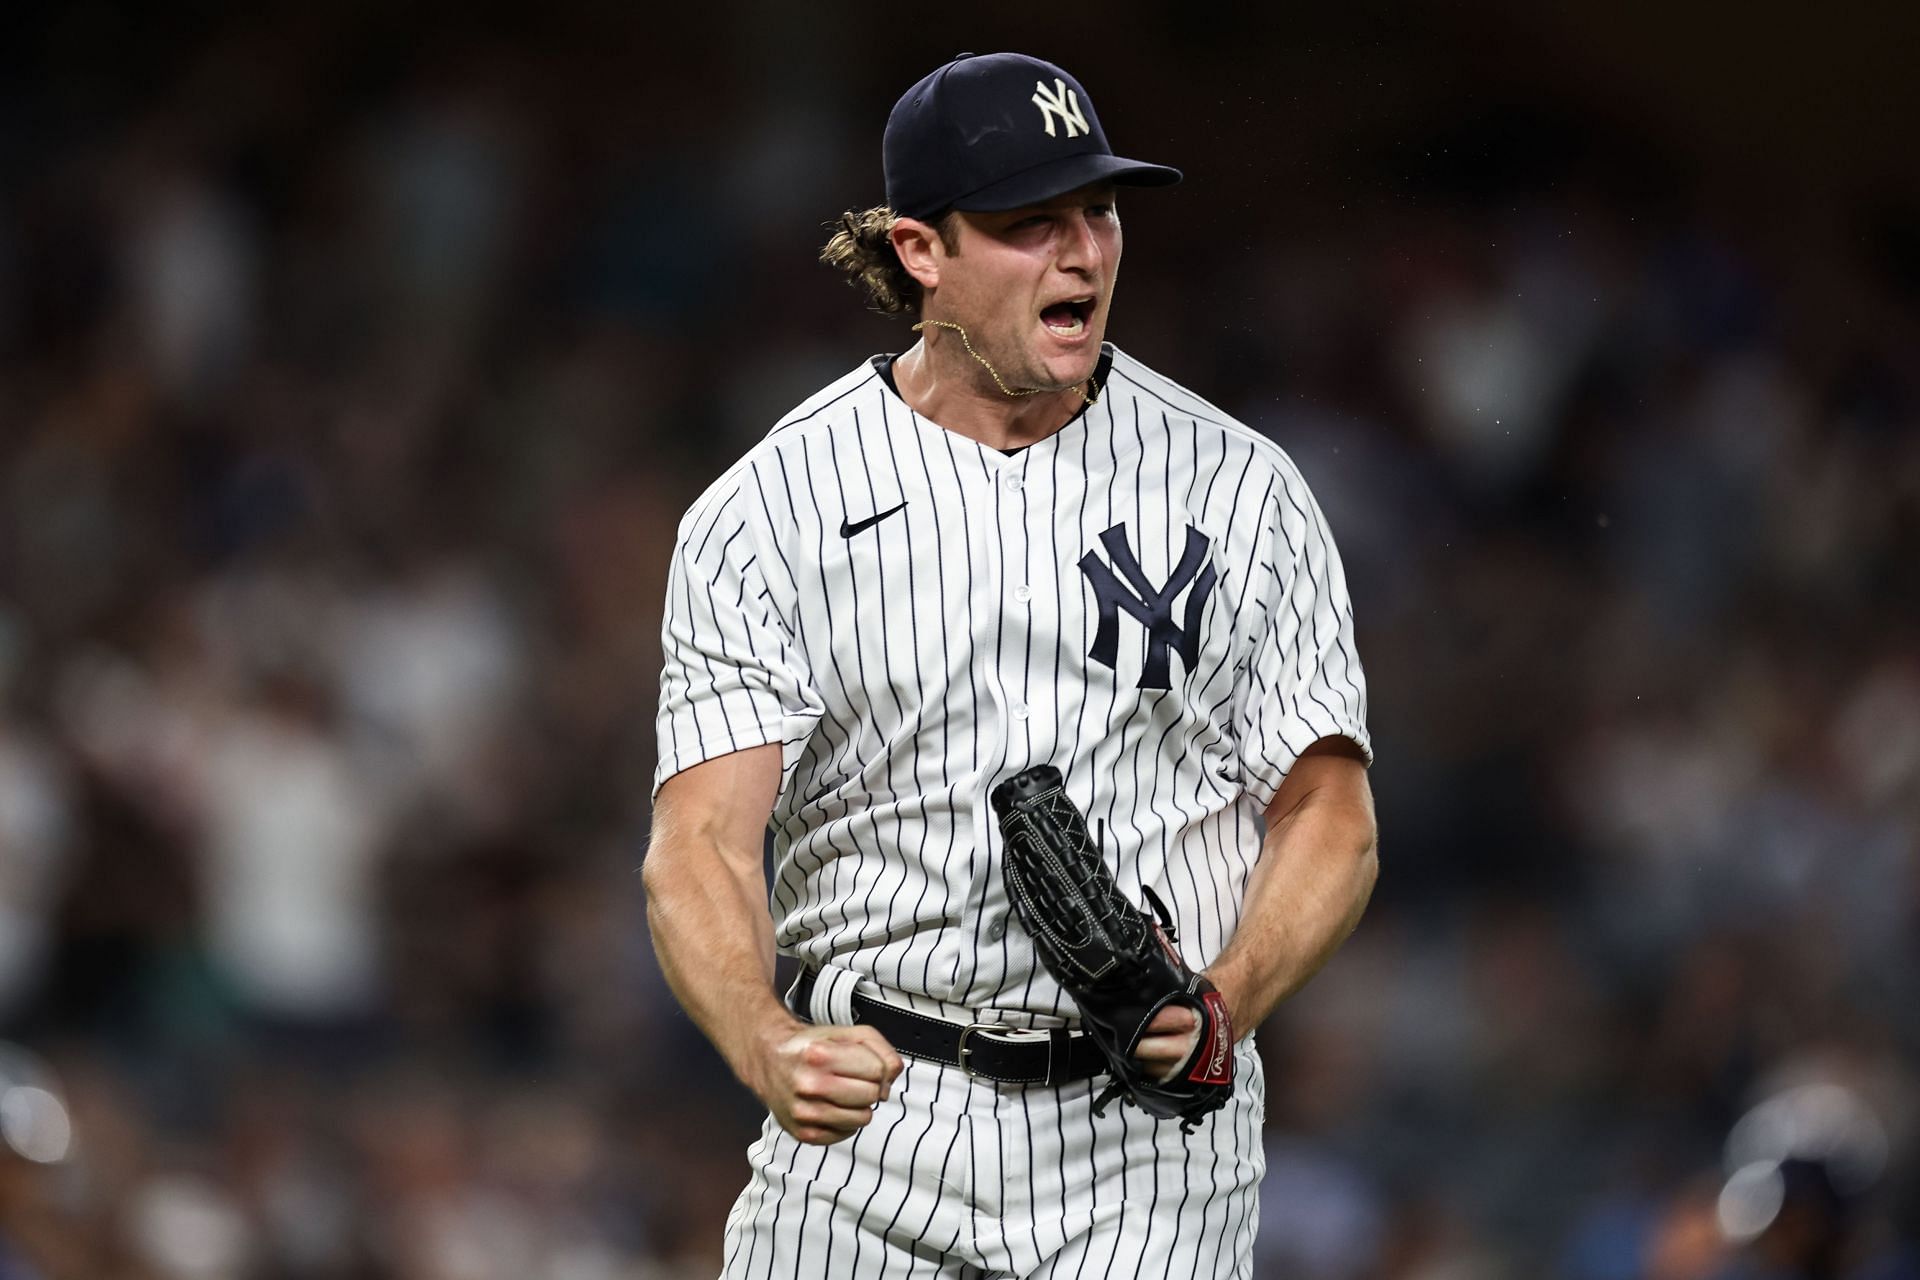 Gerrit Cole was pumped up while pitching during a Tampa Bay Rays v New York Yankees game.